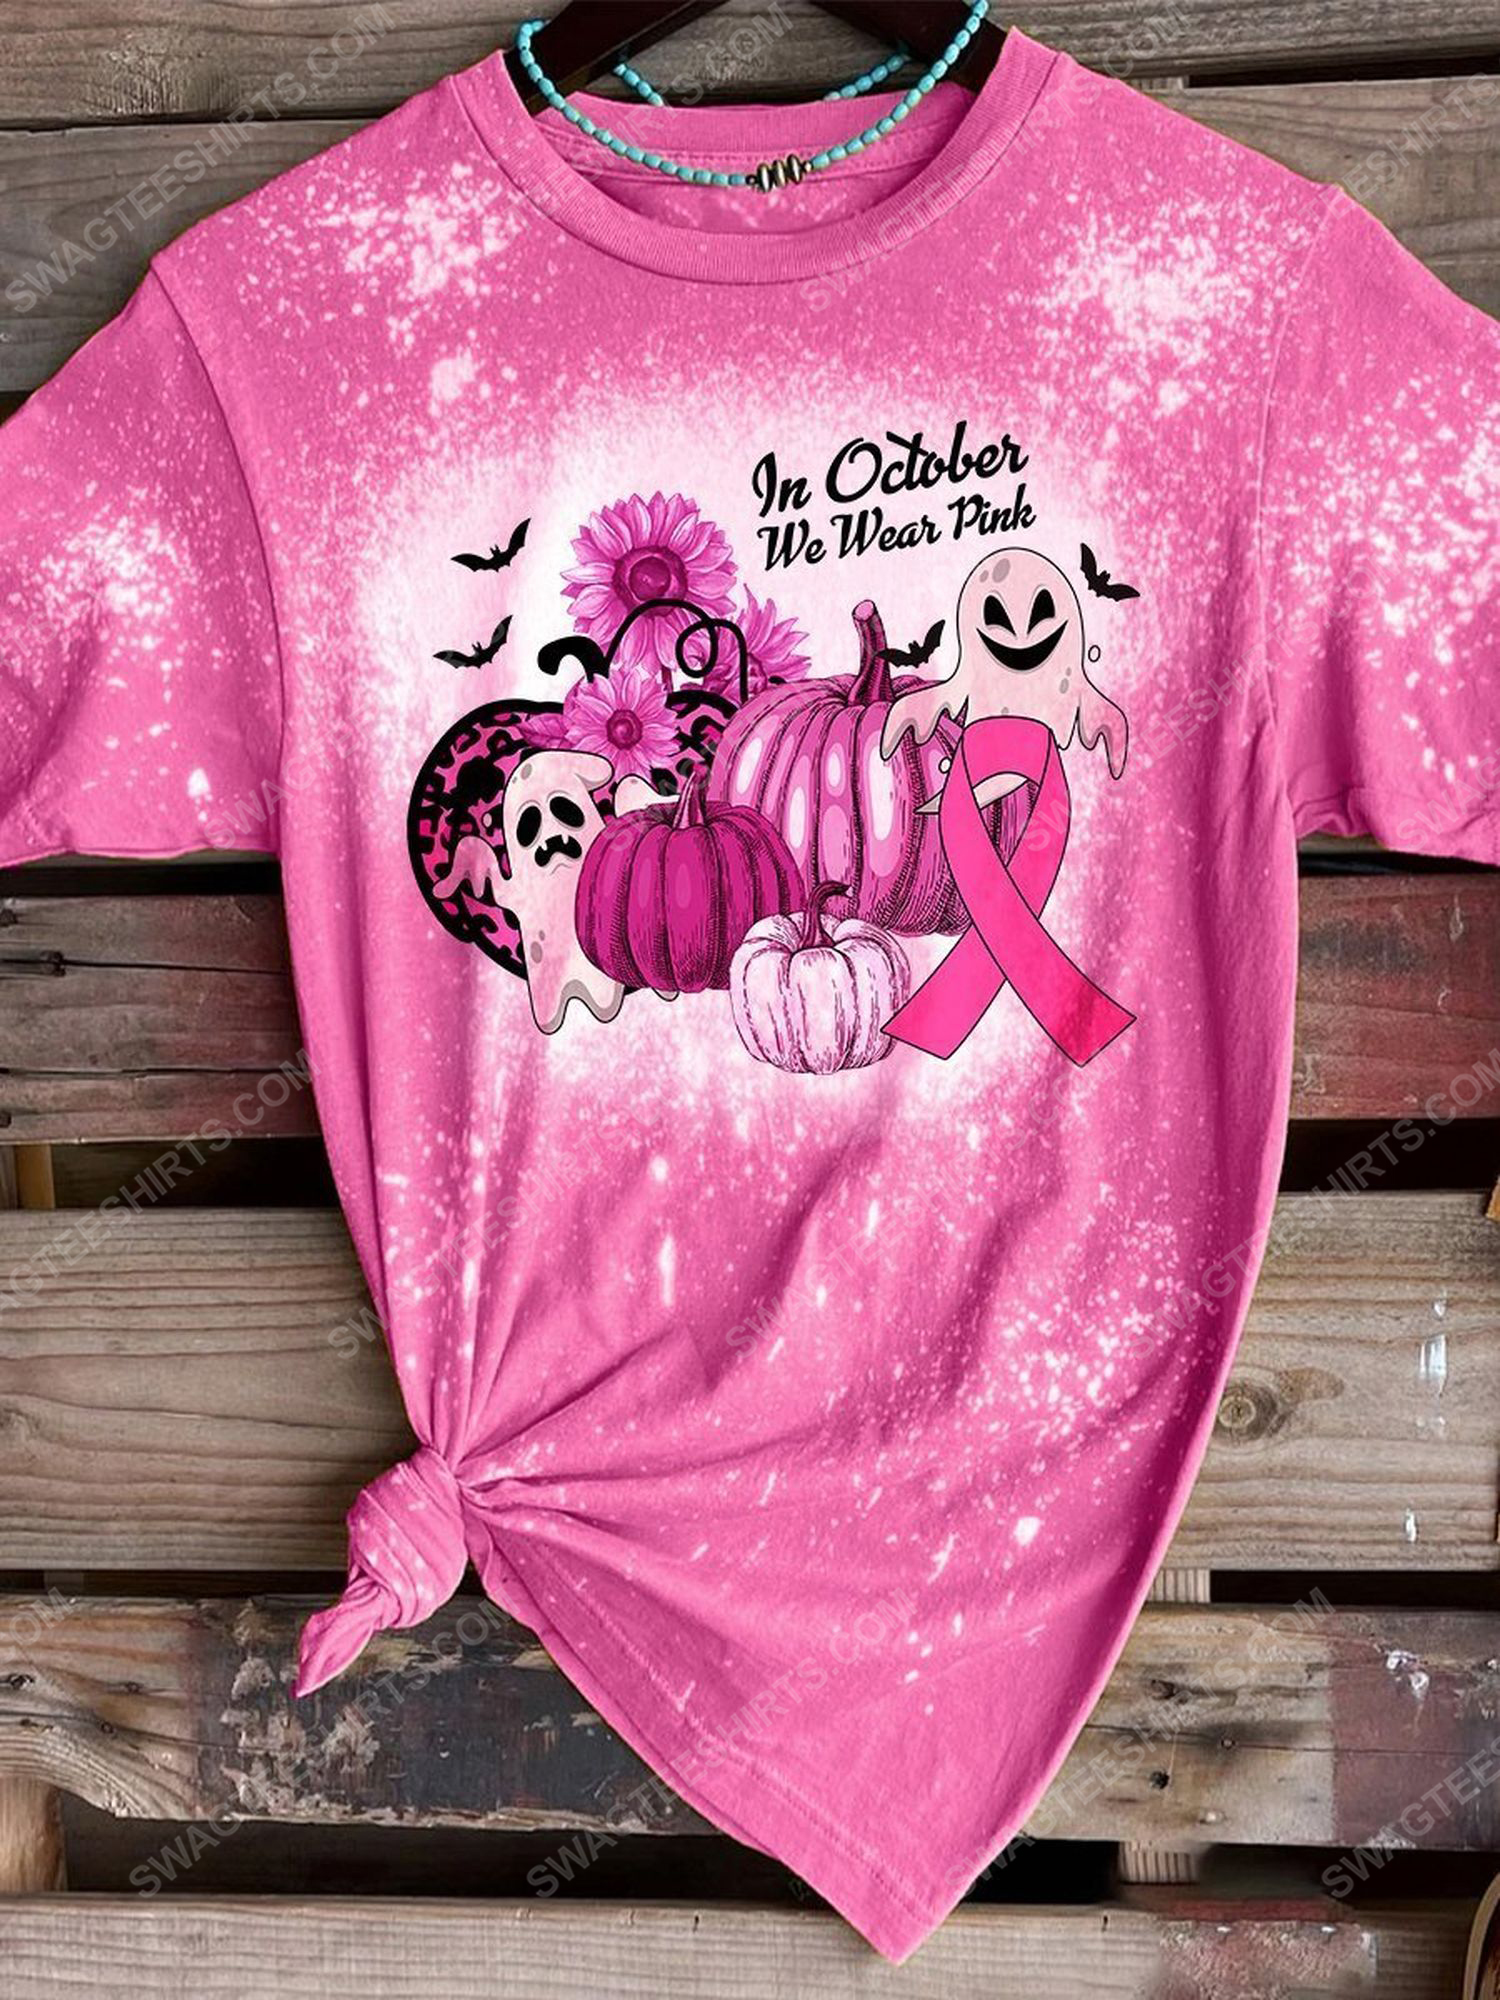 Breast cancer awareness in october we wear pink pumpkin and bat ​bleached shirt 1 - Copy